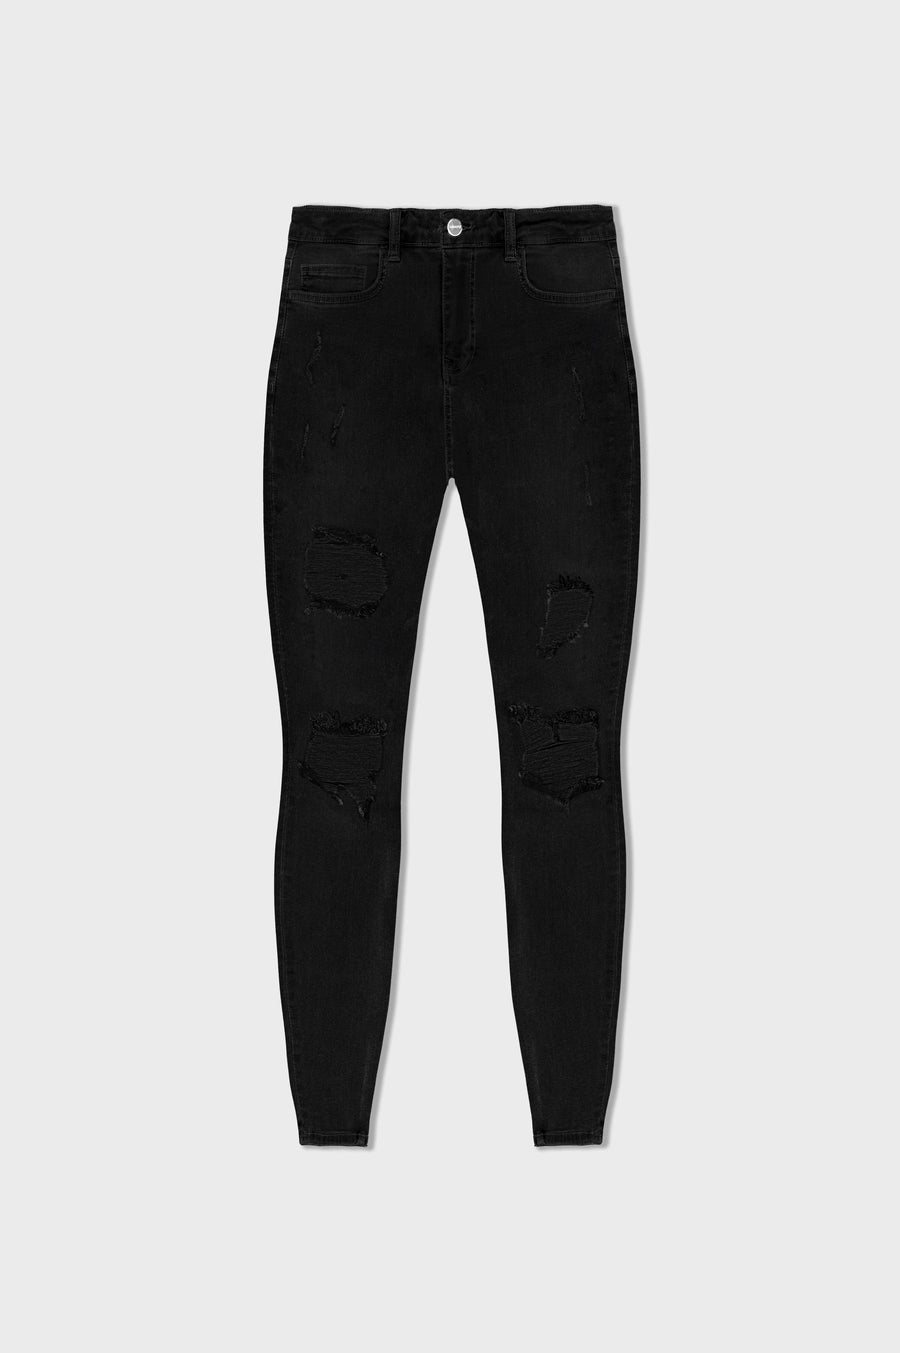 Legend London Jeans - spray on BLACK JEANS - RIPPED & REPAIRED